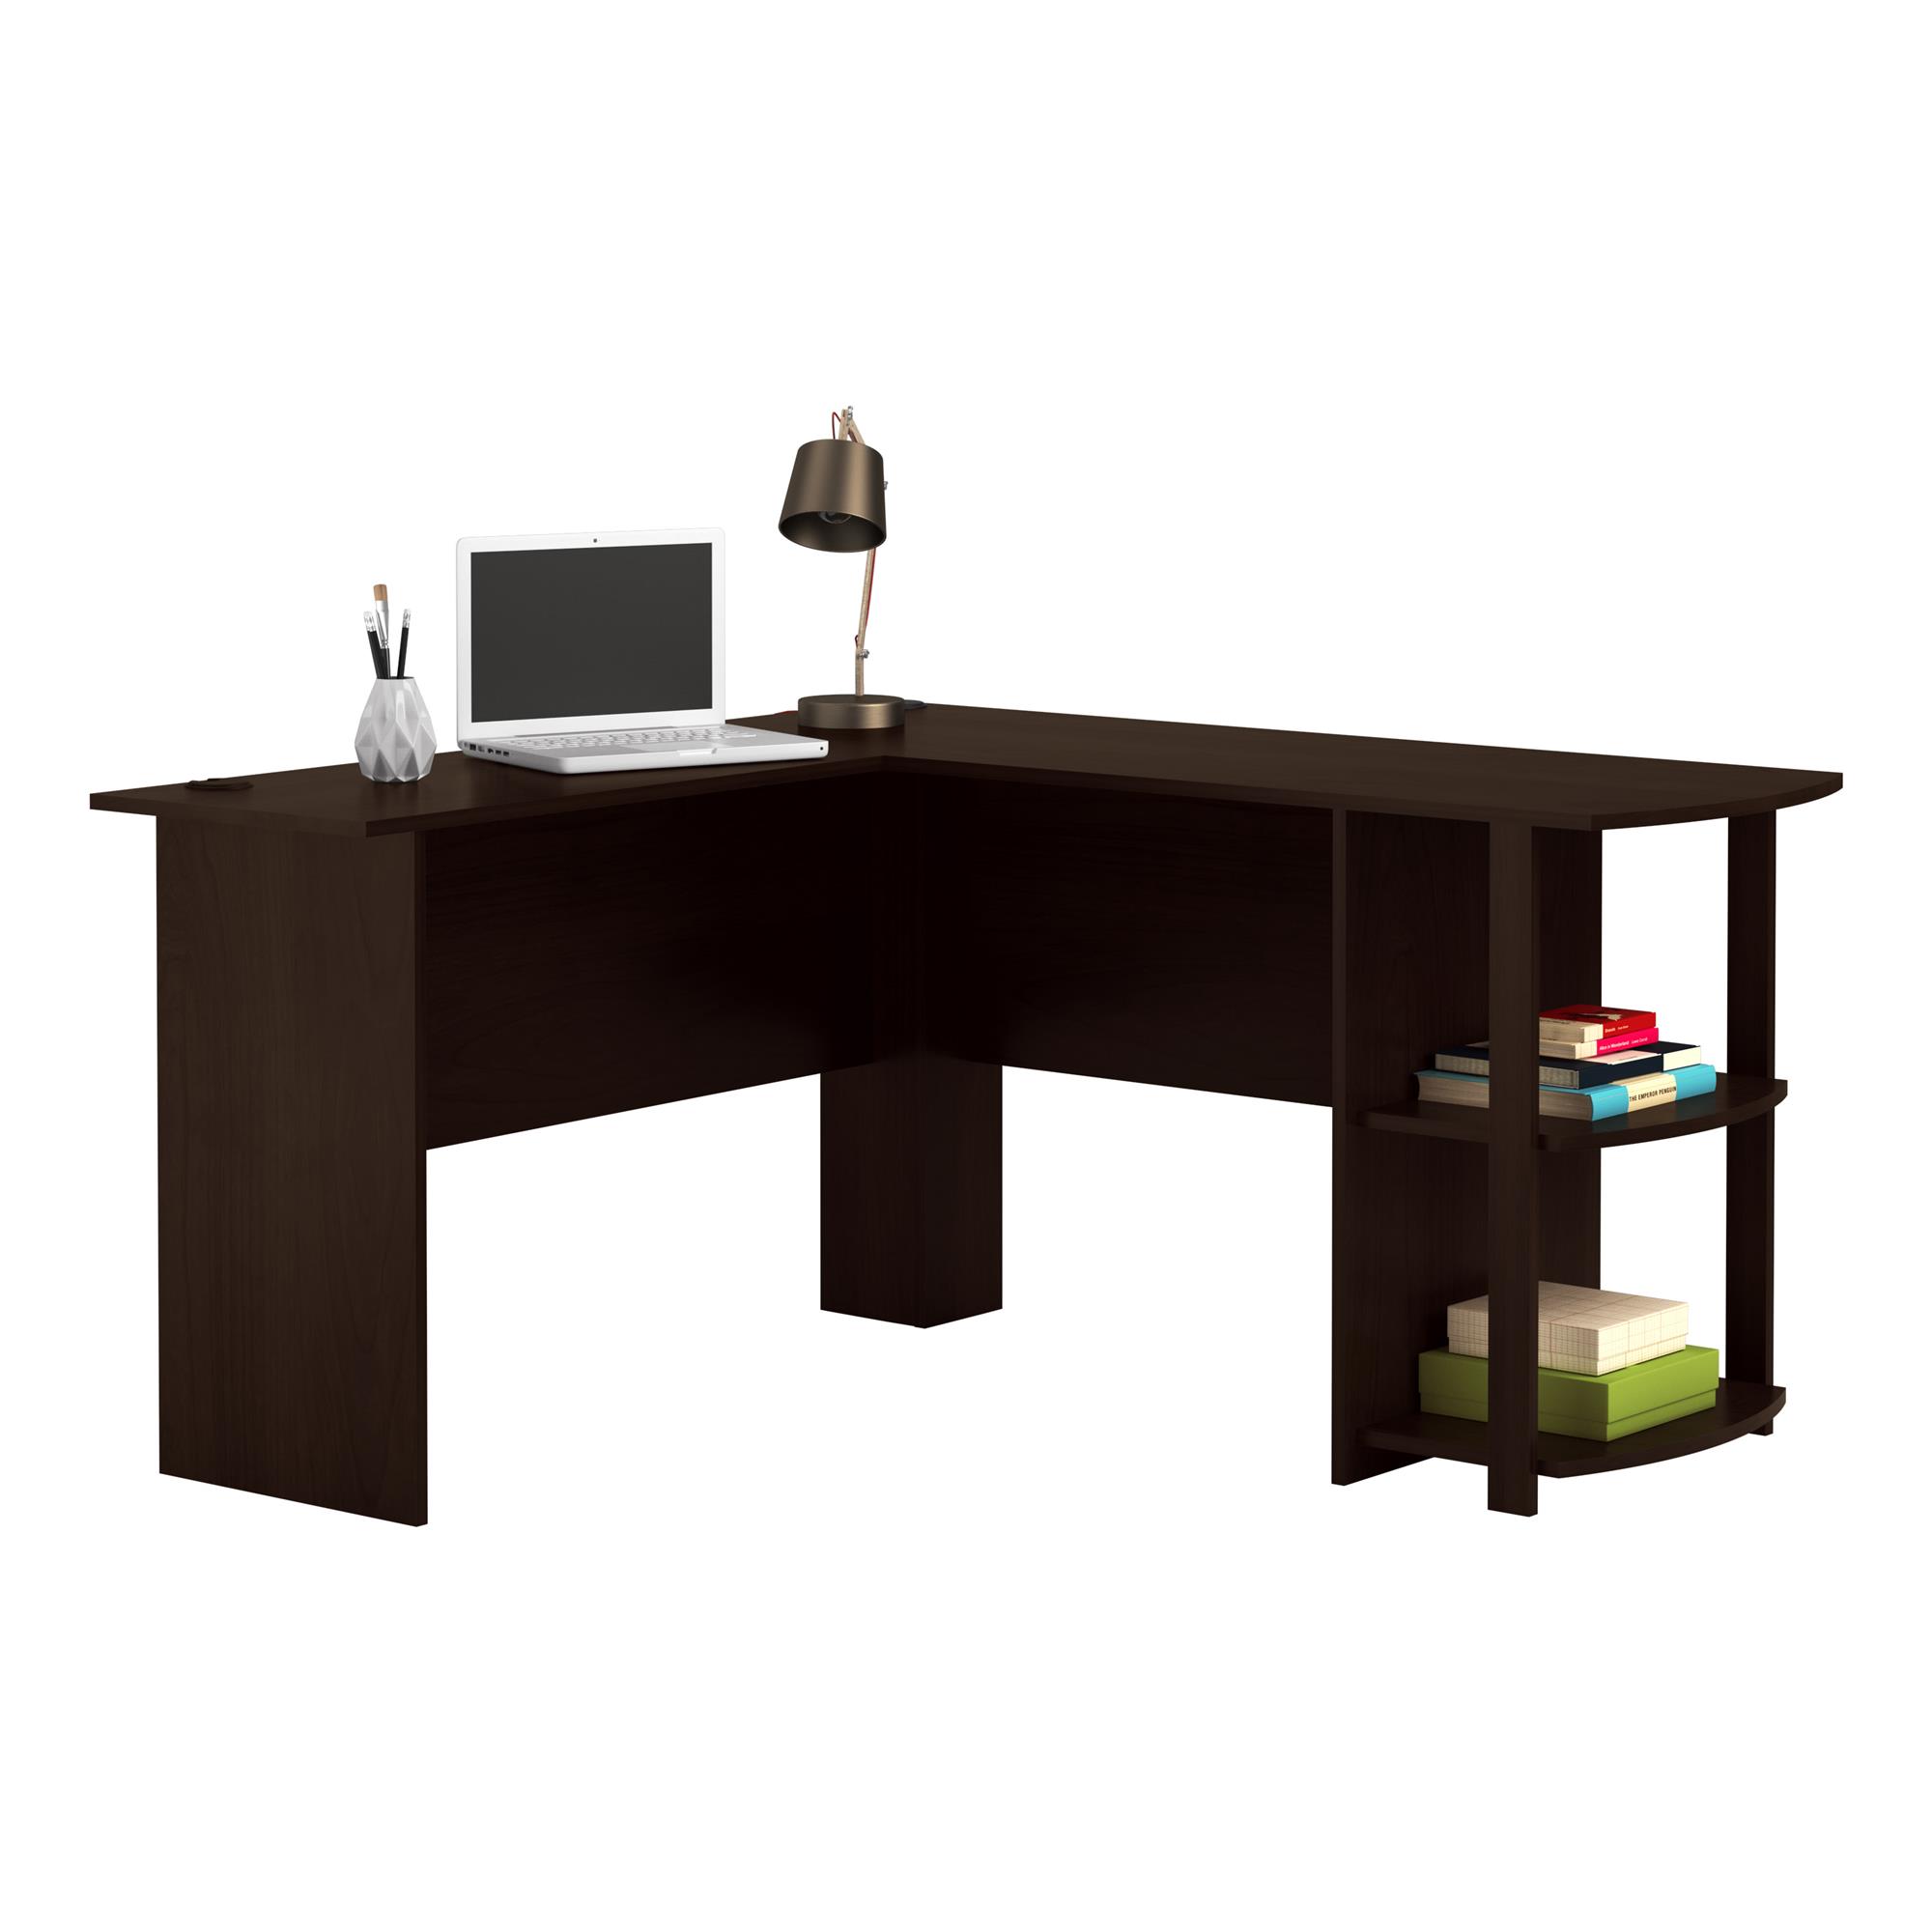 Ameriwood Home Dominic L Desk with Bookshelves, Espresso - image 3 of 12